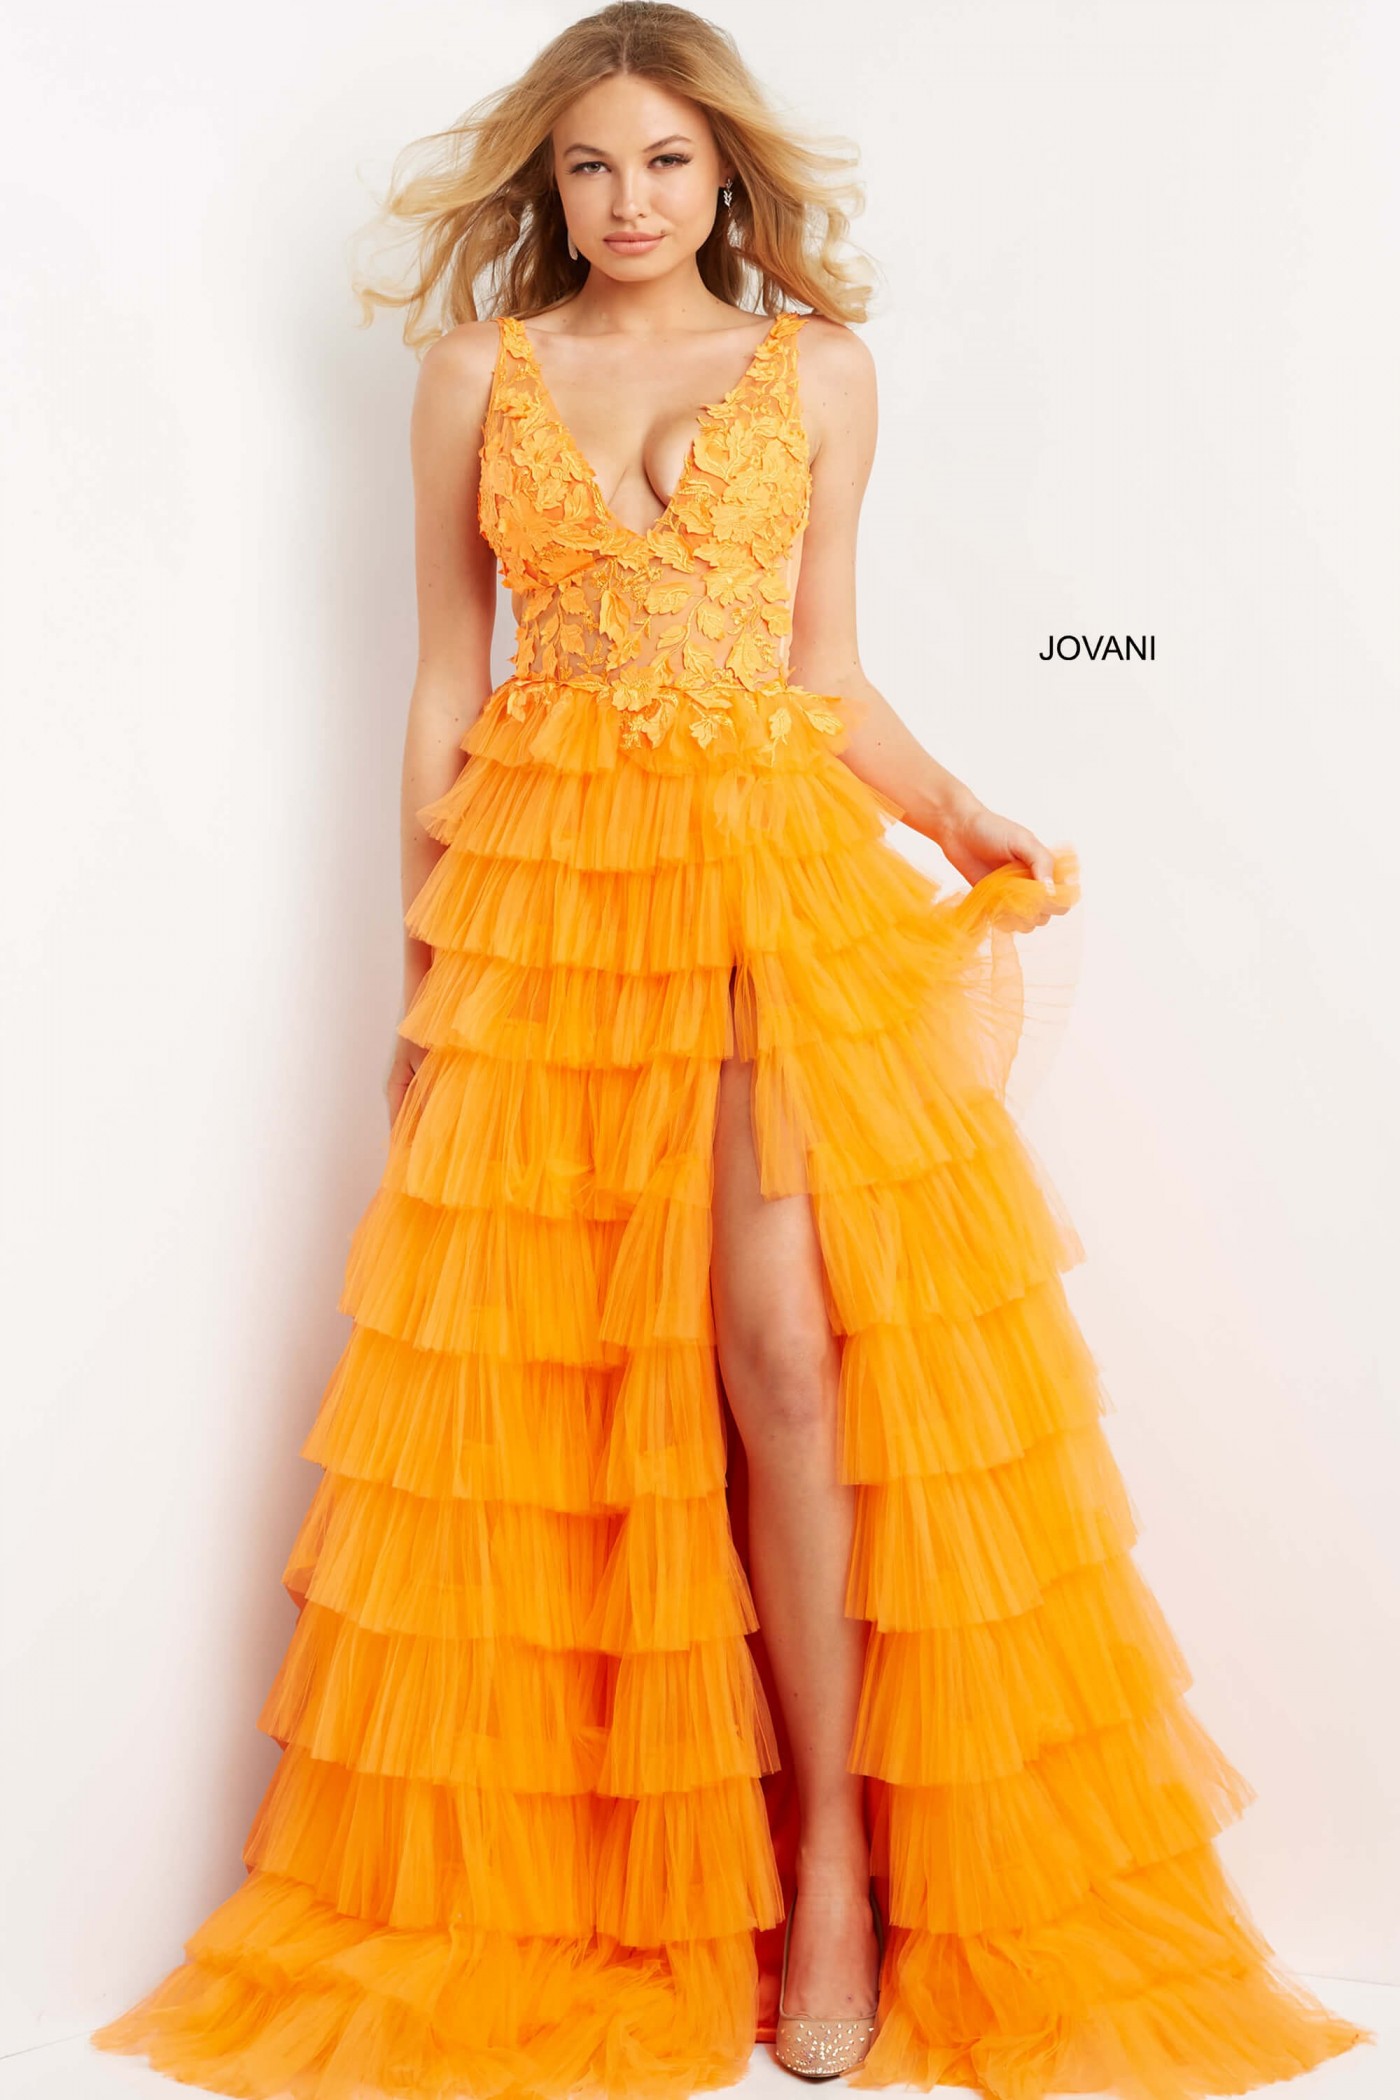 Jovani 08239 Layered Tull Prom Ball Gown